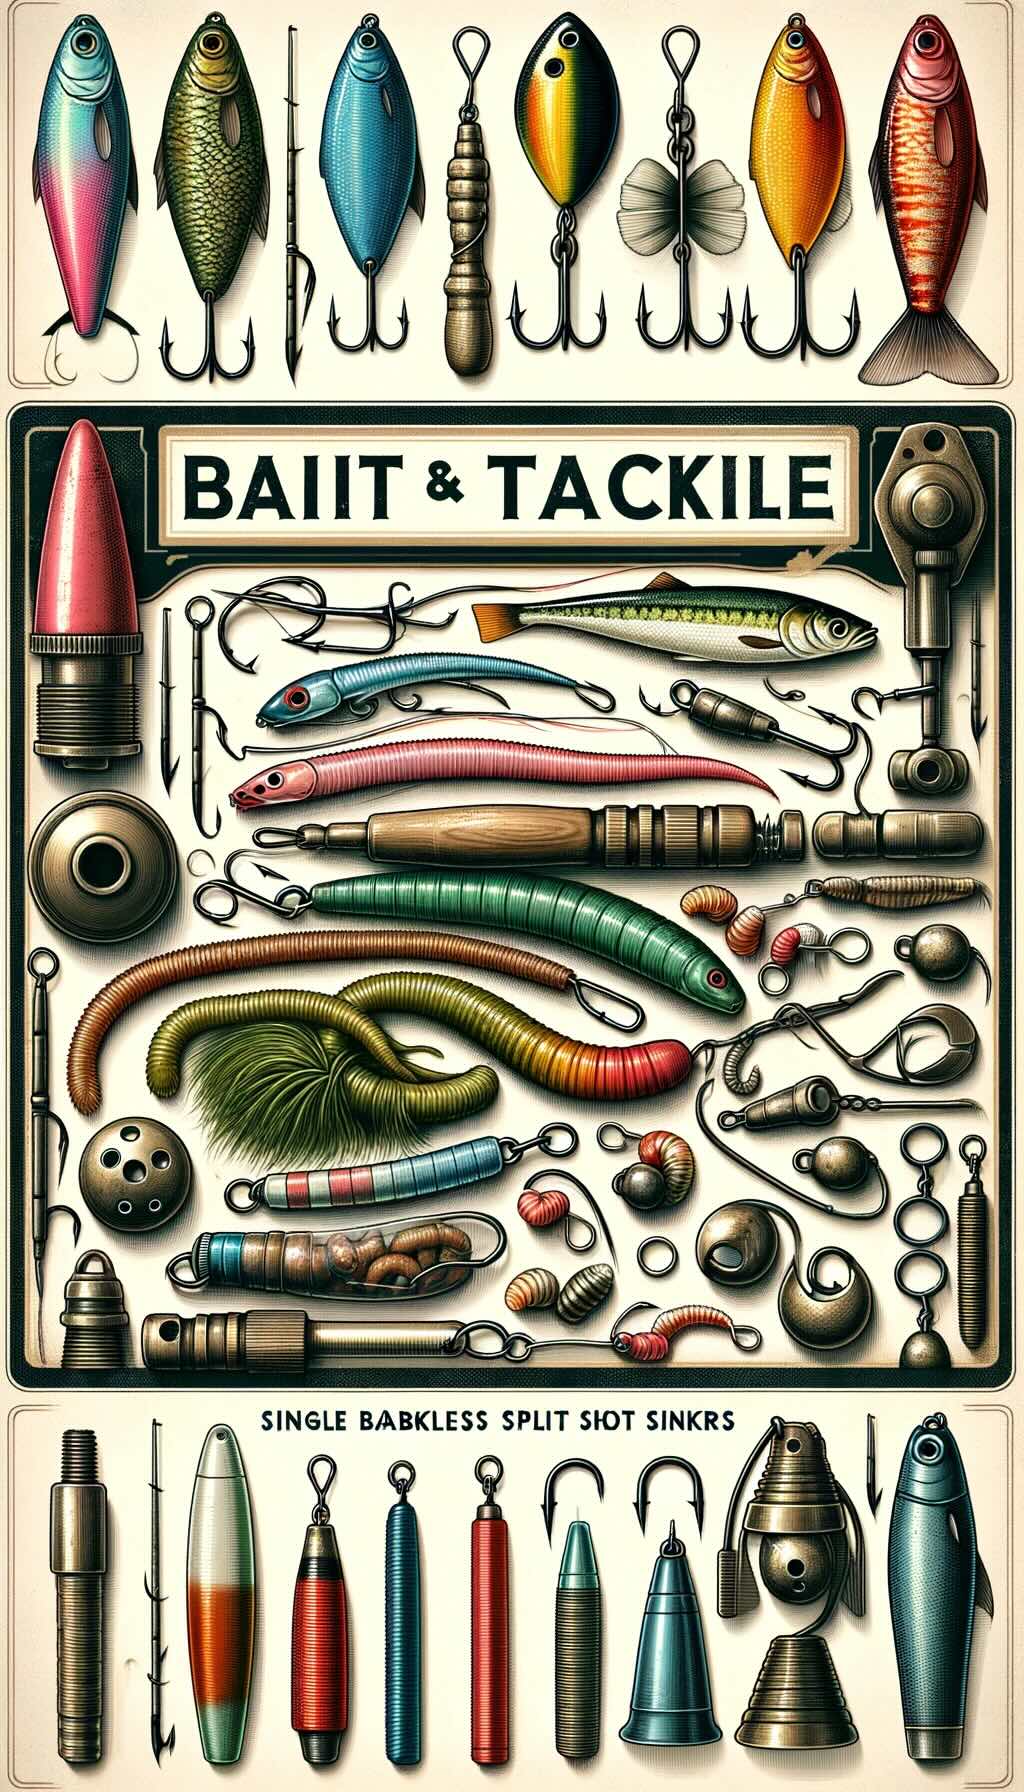 Various bait and tackle options for fishing includes different types of bait, lures, hooks, and weights, depicted in a vintage manner that highlights the traditional aspects of fishing